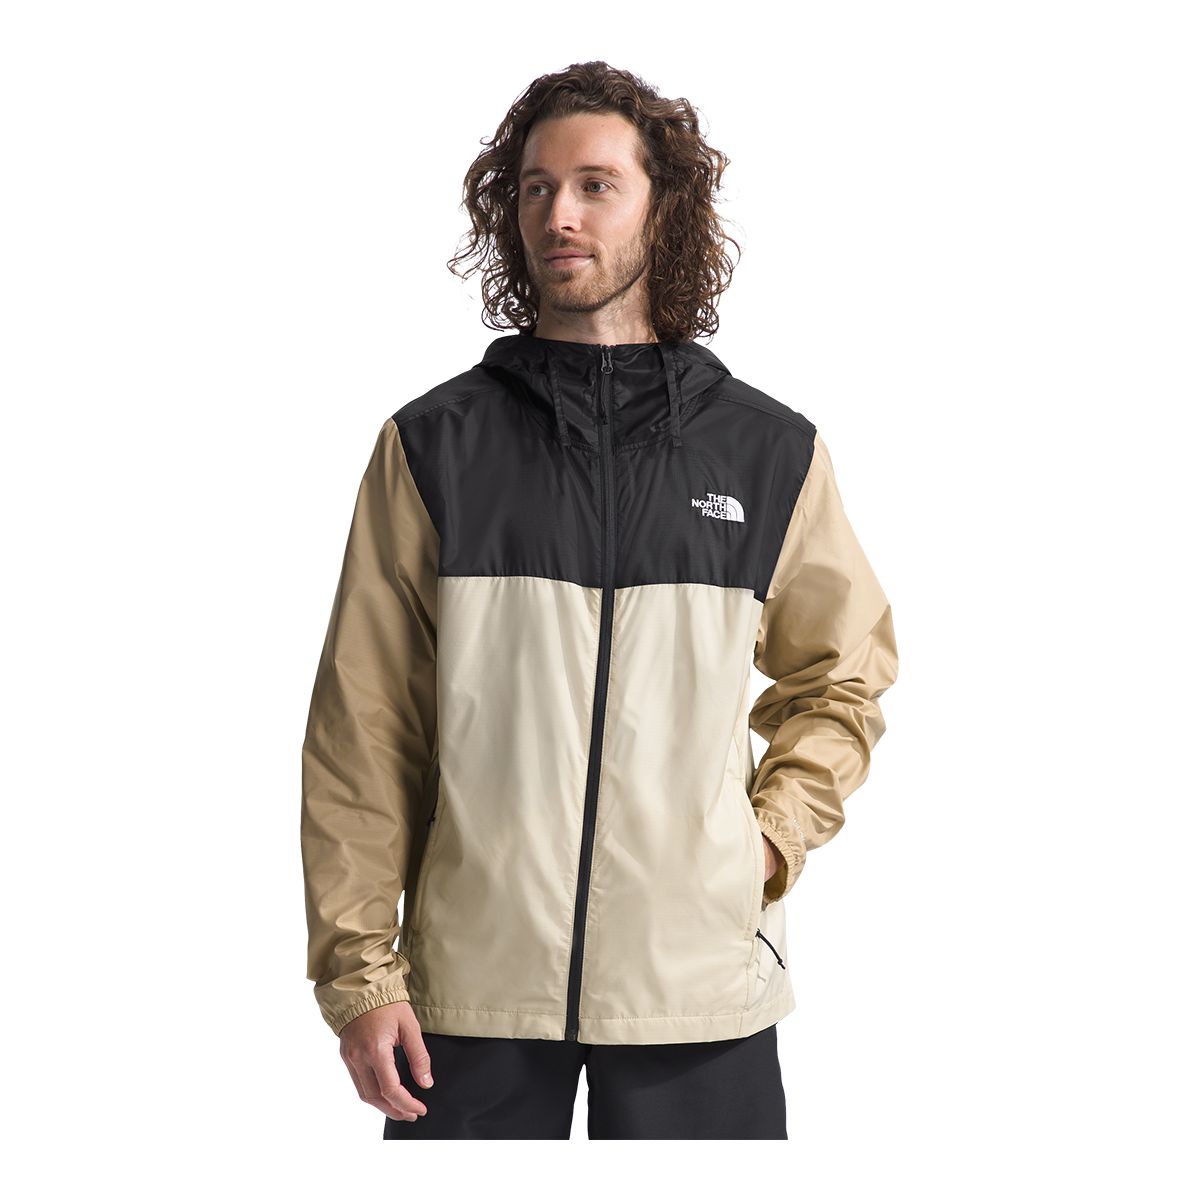 Image of The North Face Men's Cyclone Windbreaker Jacket